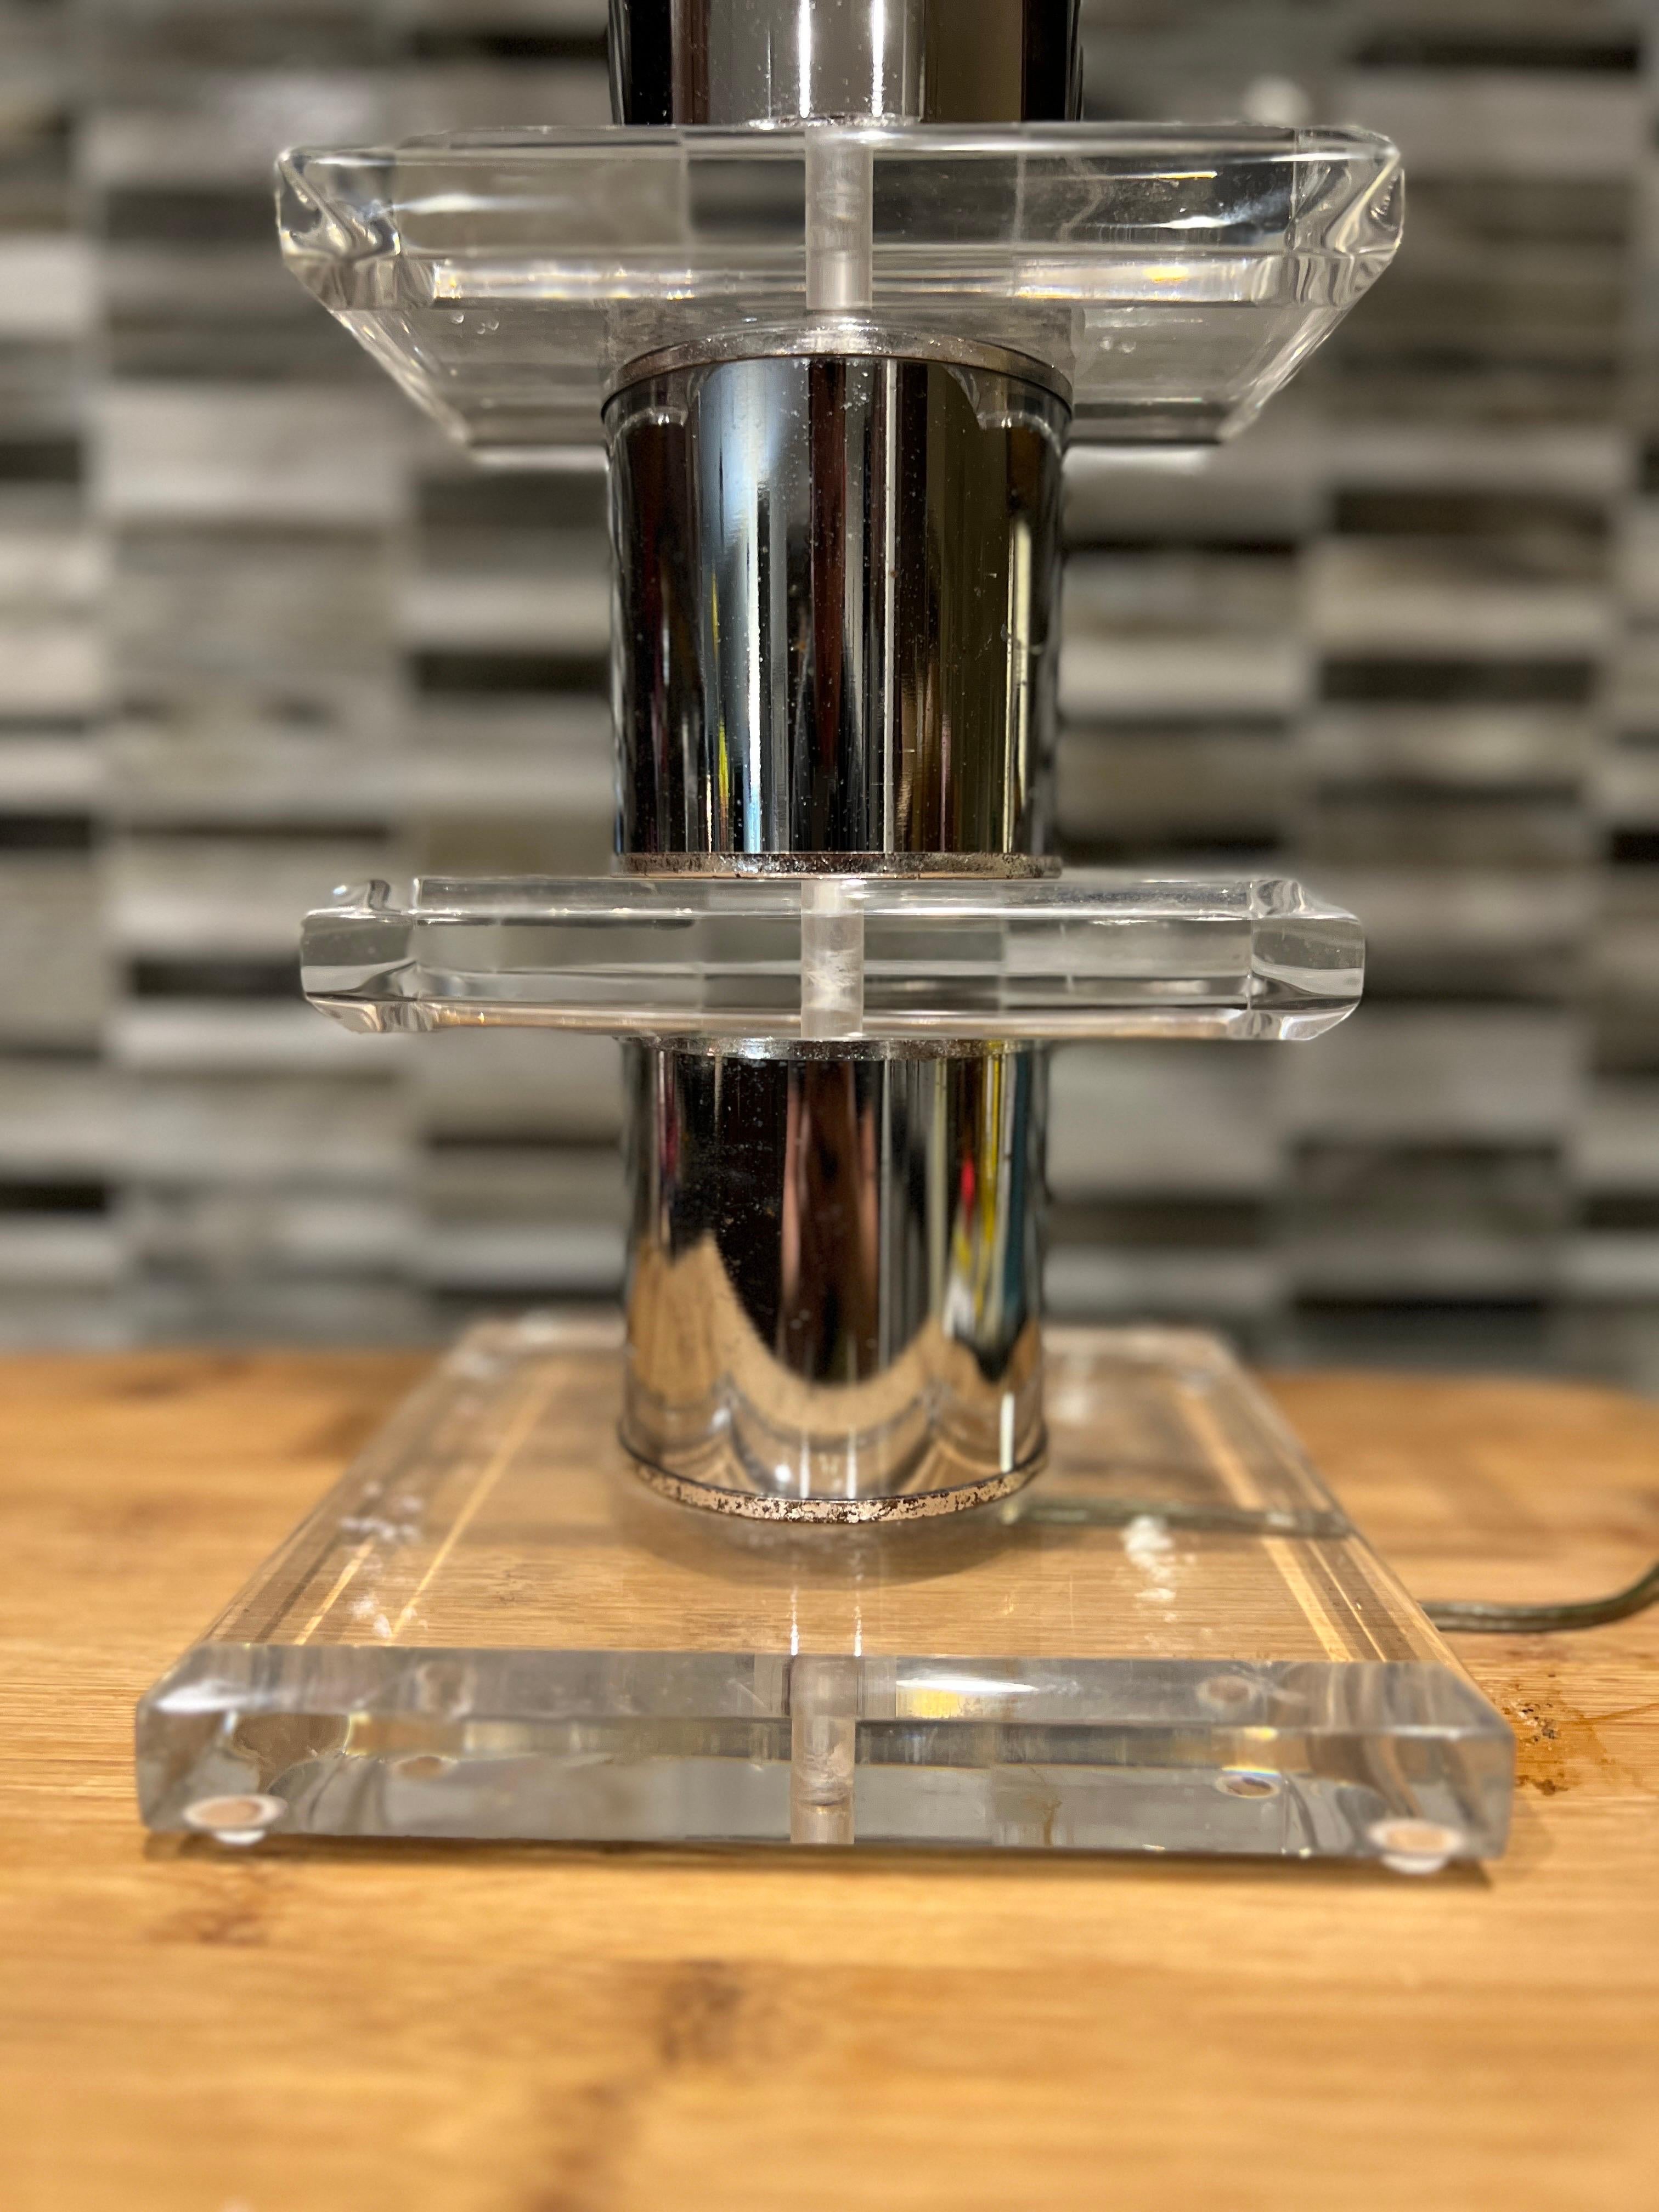 American, mid 20th century.

A vintage MCM table lamp with stacked and tiered lucite blocks separated by chrome cylinders. Apparently unmarked. 